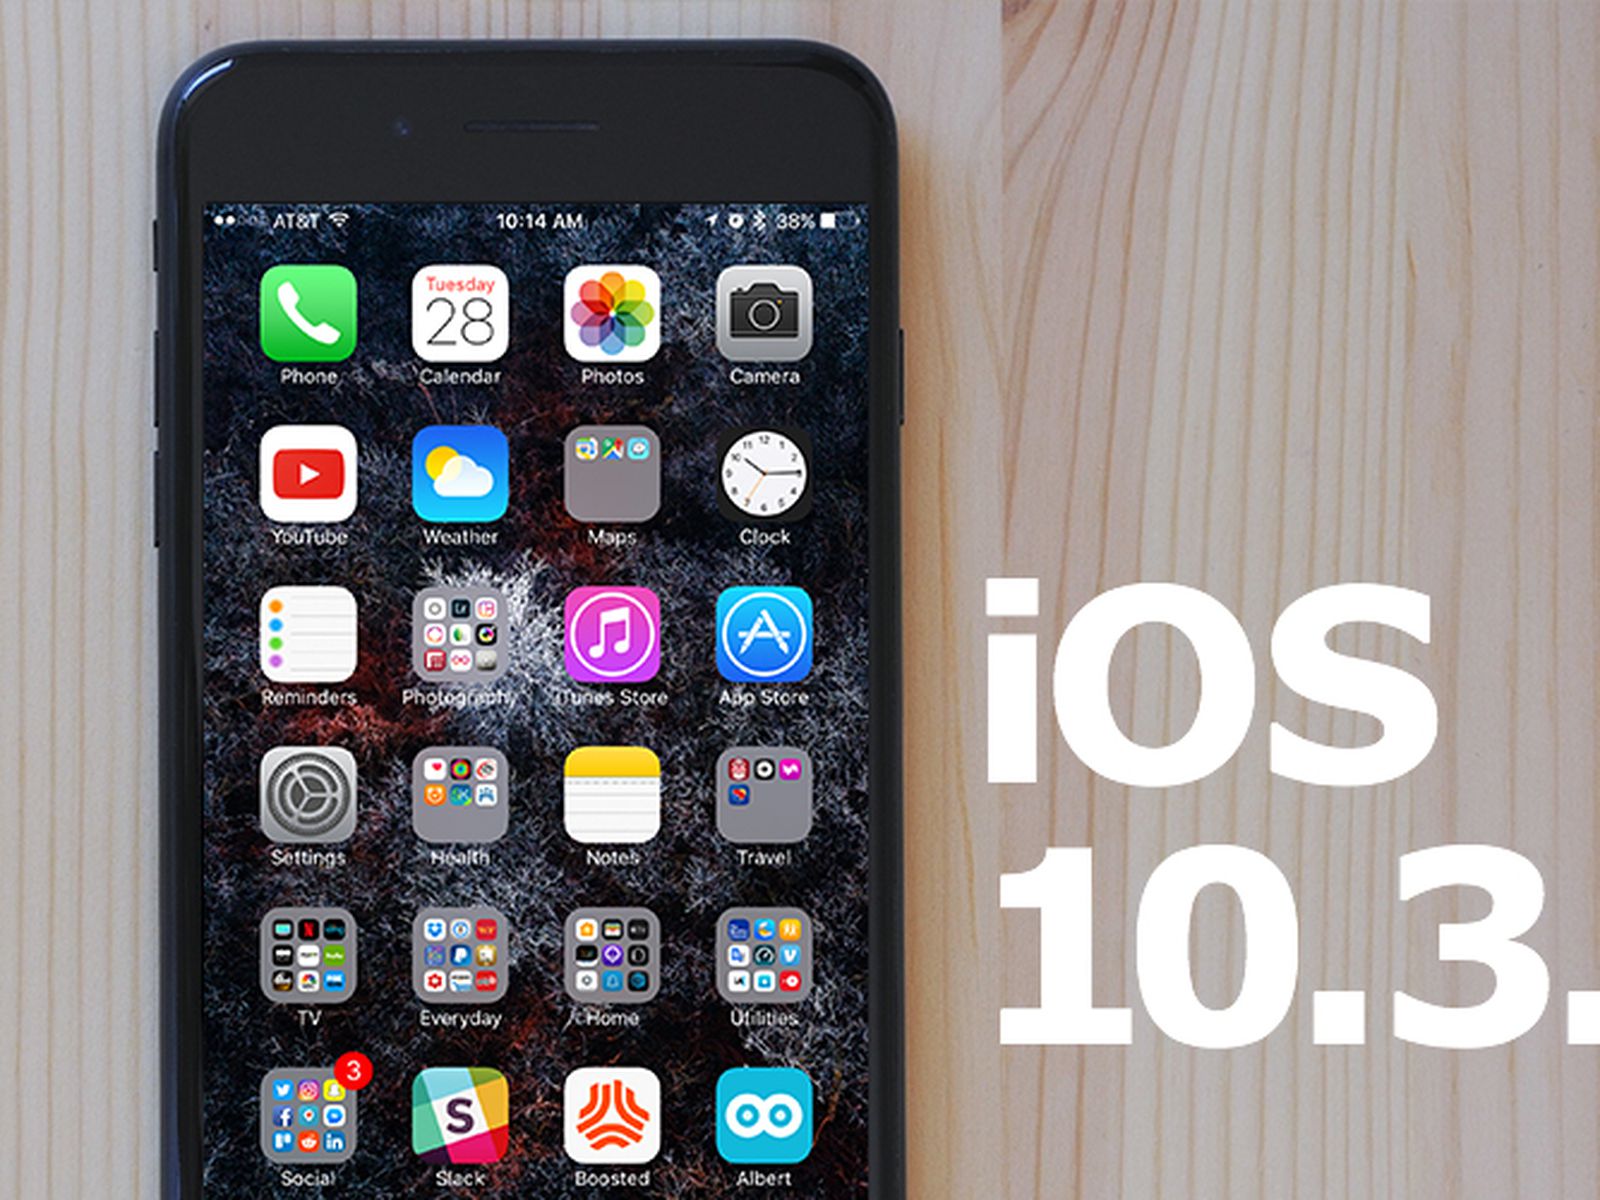 ios-10-3-1-jailbreak-might-release-soon-with-iphone-7-support